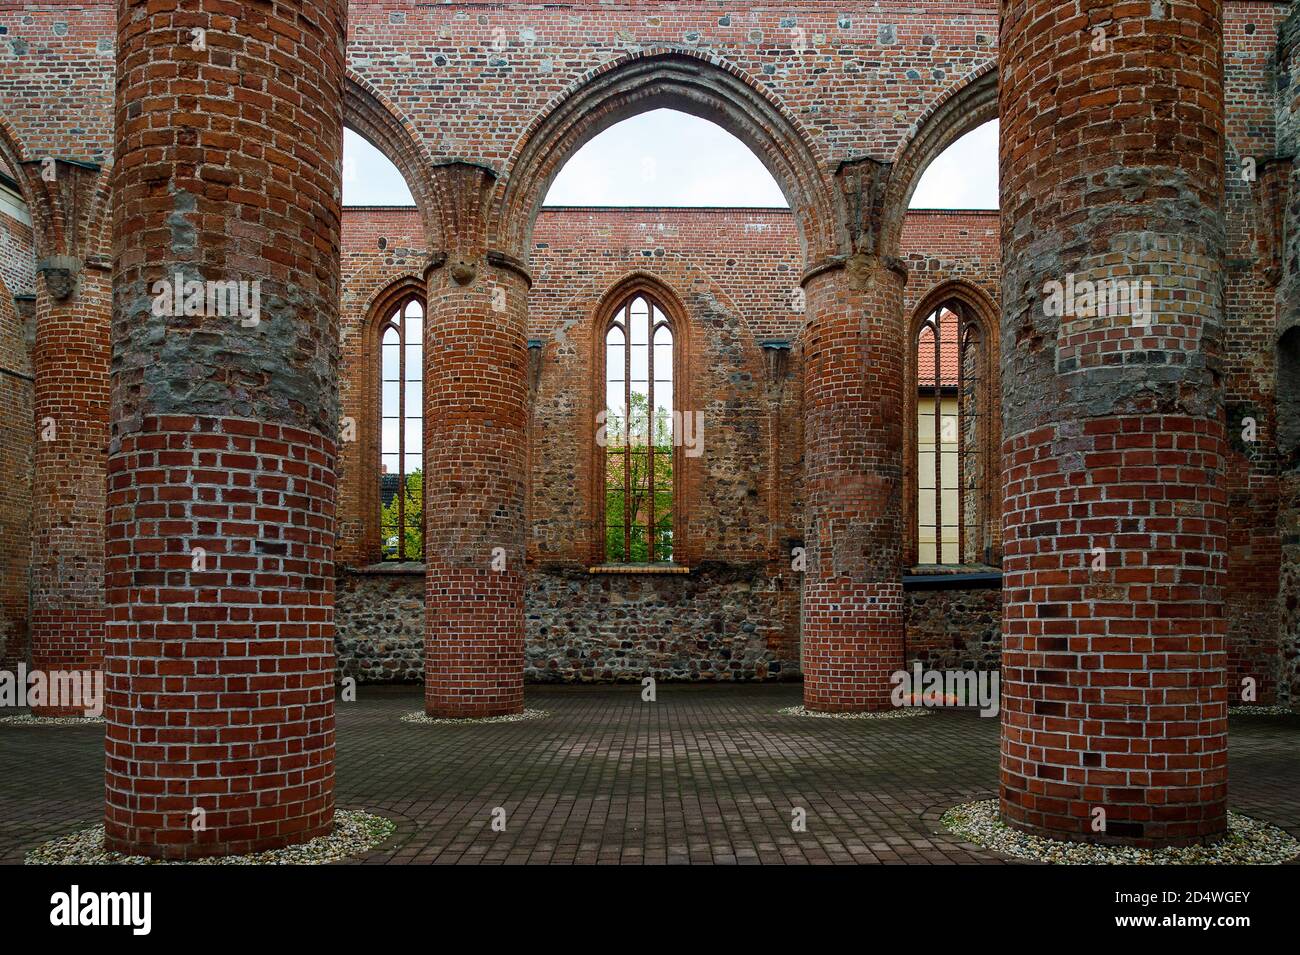 Zerbst, Germany. 07th Oct, 2020. The columns of the side aisles of the partial ruin of the collegiate and court church of St. Bartholomew. The church was built at the beginning of the 13th century as a Romanesque basilica and was extended several times over the centuries in Gothic, Renaissance and Baroque architectural styles. The church was destroyed in a bombing raid in the last weeks of the Second World War. Only a part of the church could be preserved. Credit: Klaus-Dietmar Gabbert/dpa-Zentralbild/ZB/dpa/Alamy Live News Stock Photo